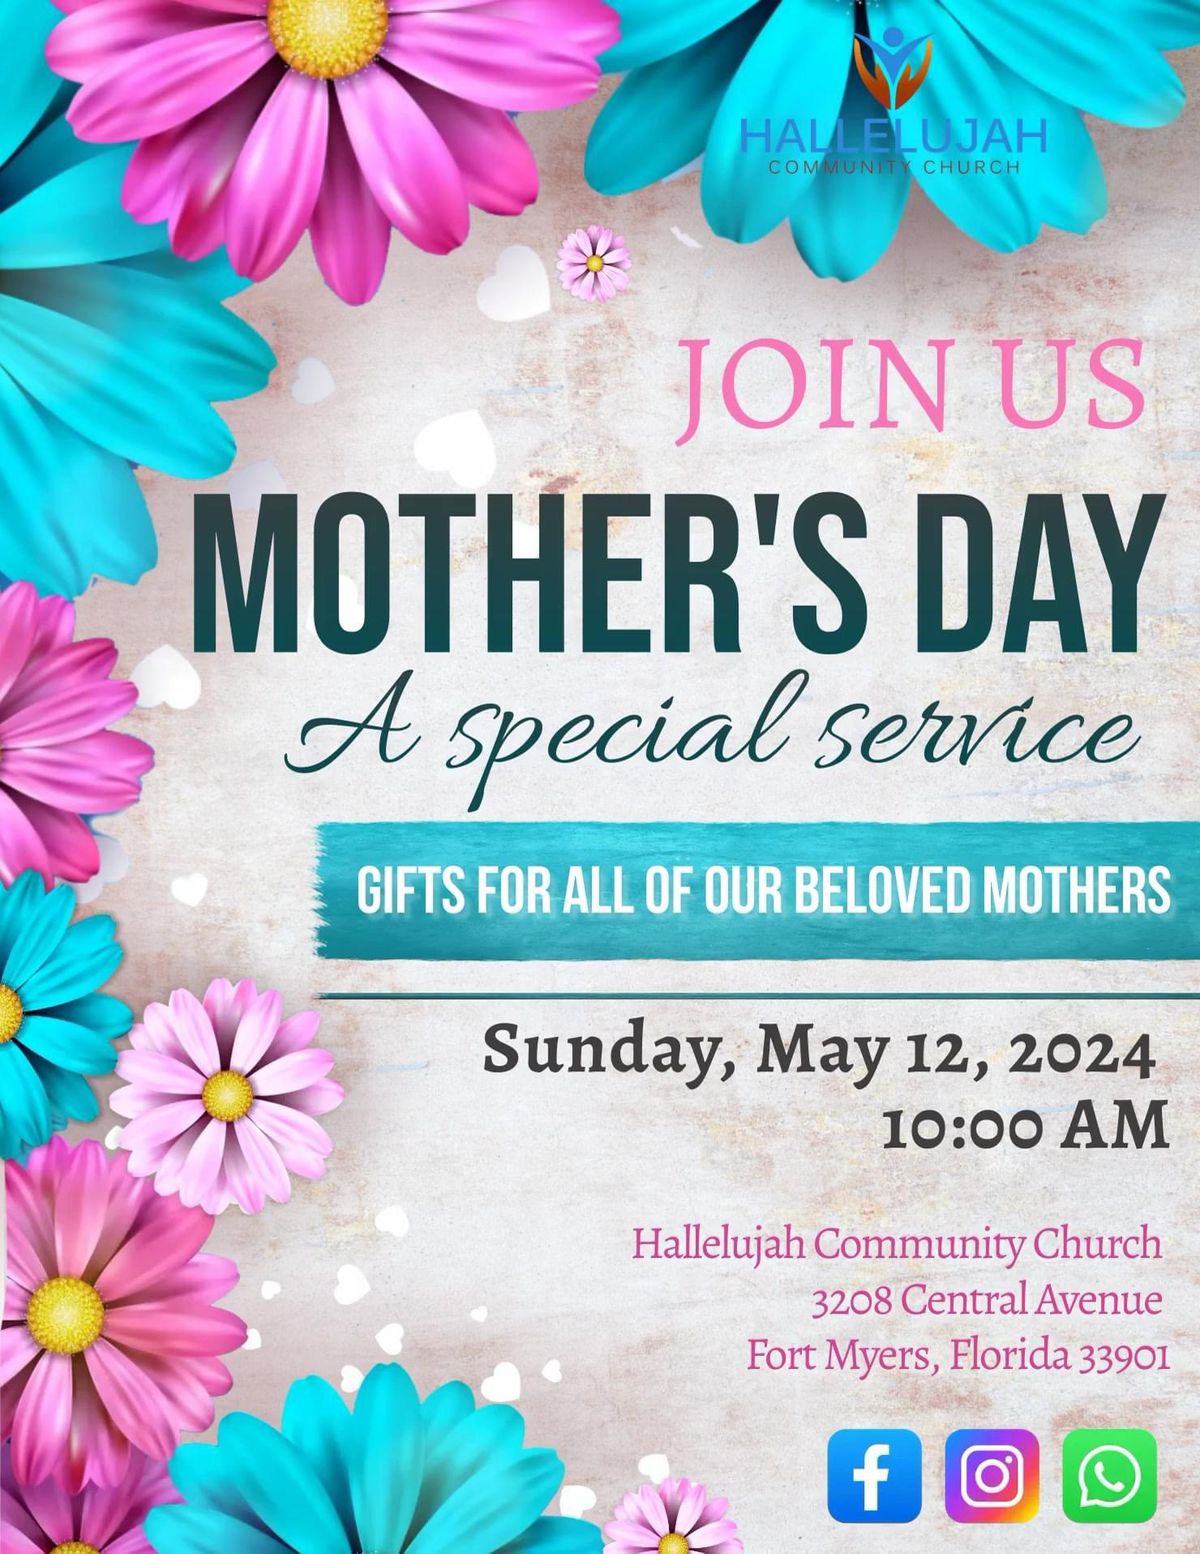 Mother's Day Service